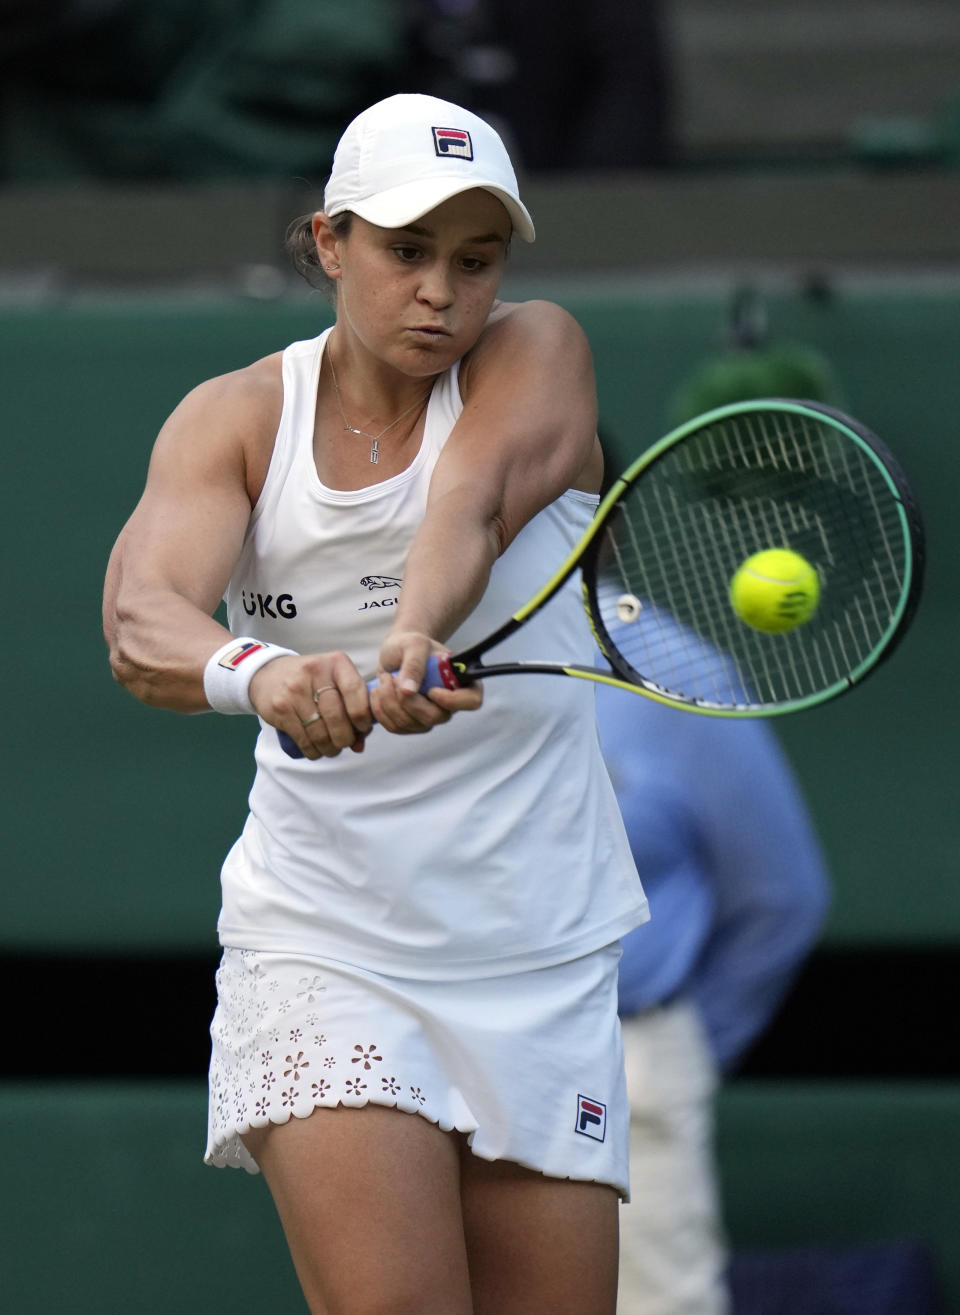 Australia's Ashleigh Barty plays a return to Czech Republic's Katerina Siniakova during the women's singles third round match on day six of the Wimbledon Tennis Championships in London, Saturday July 3, 2021. (AP Photo/Alastair Grant)